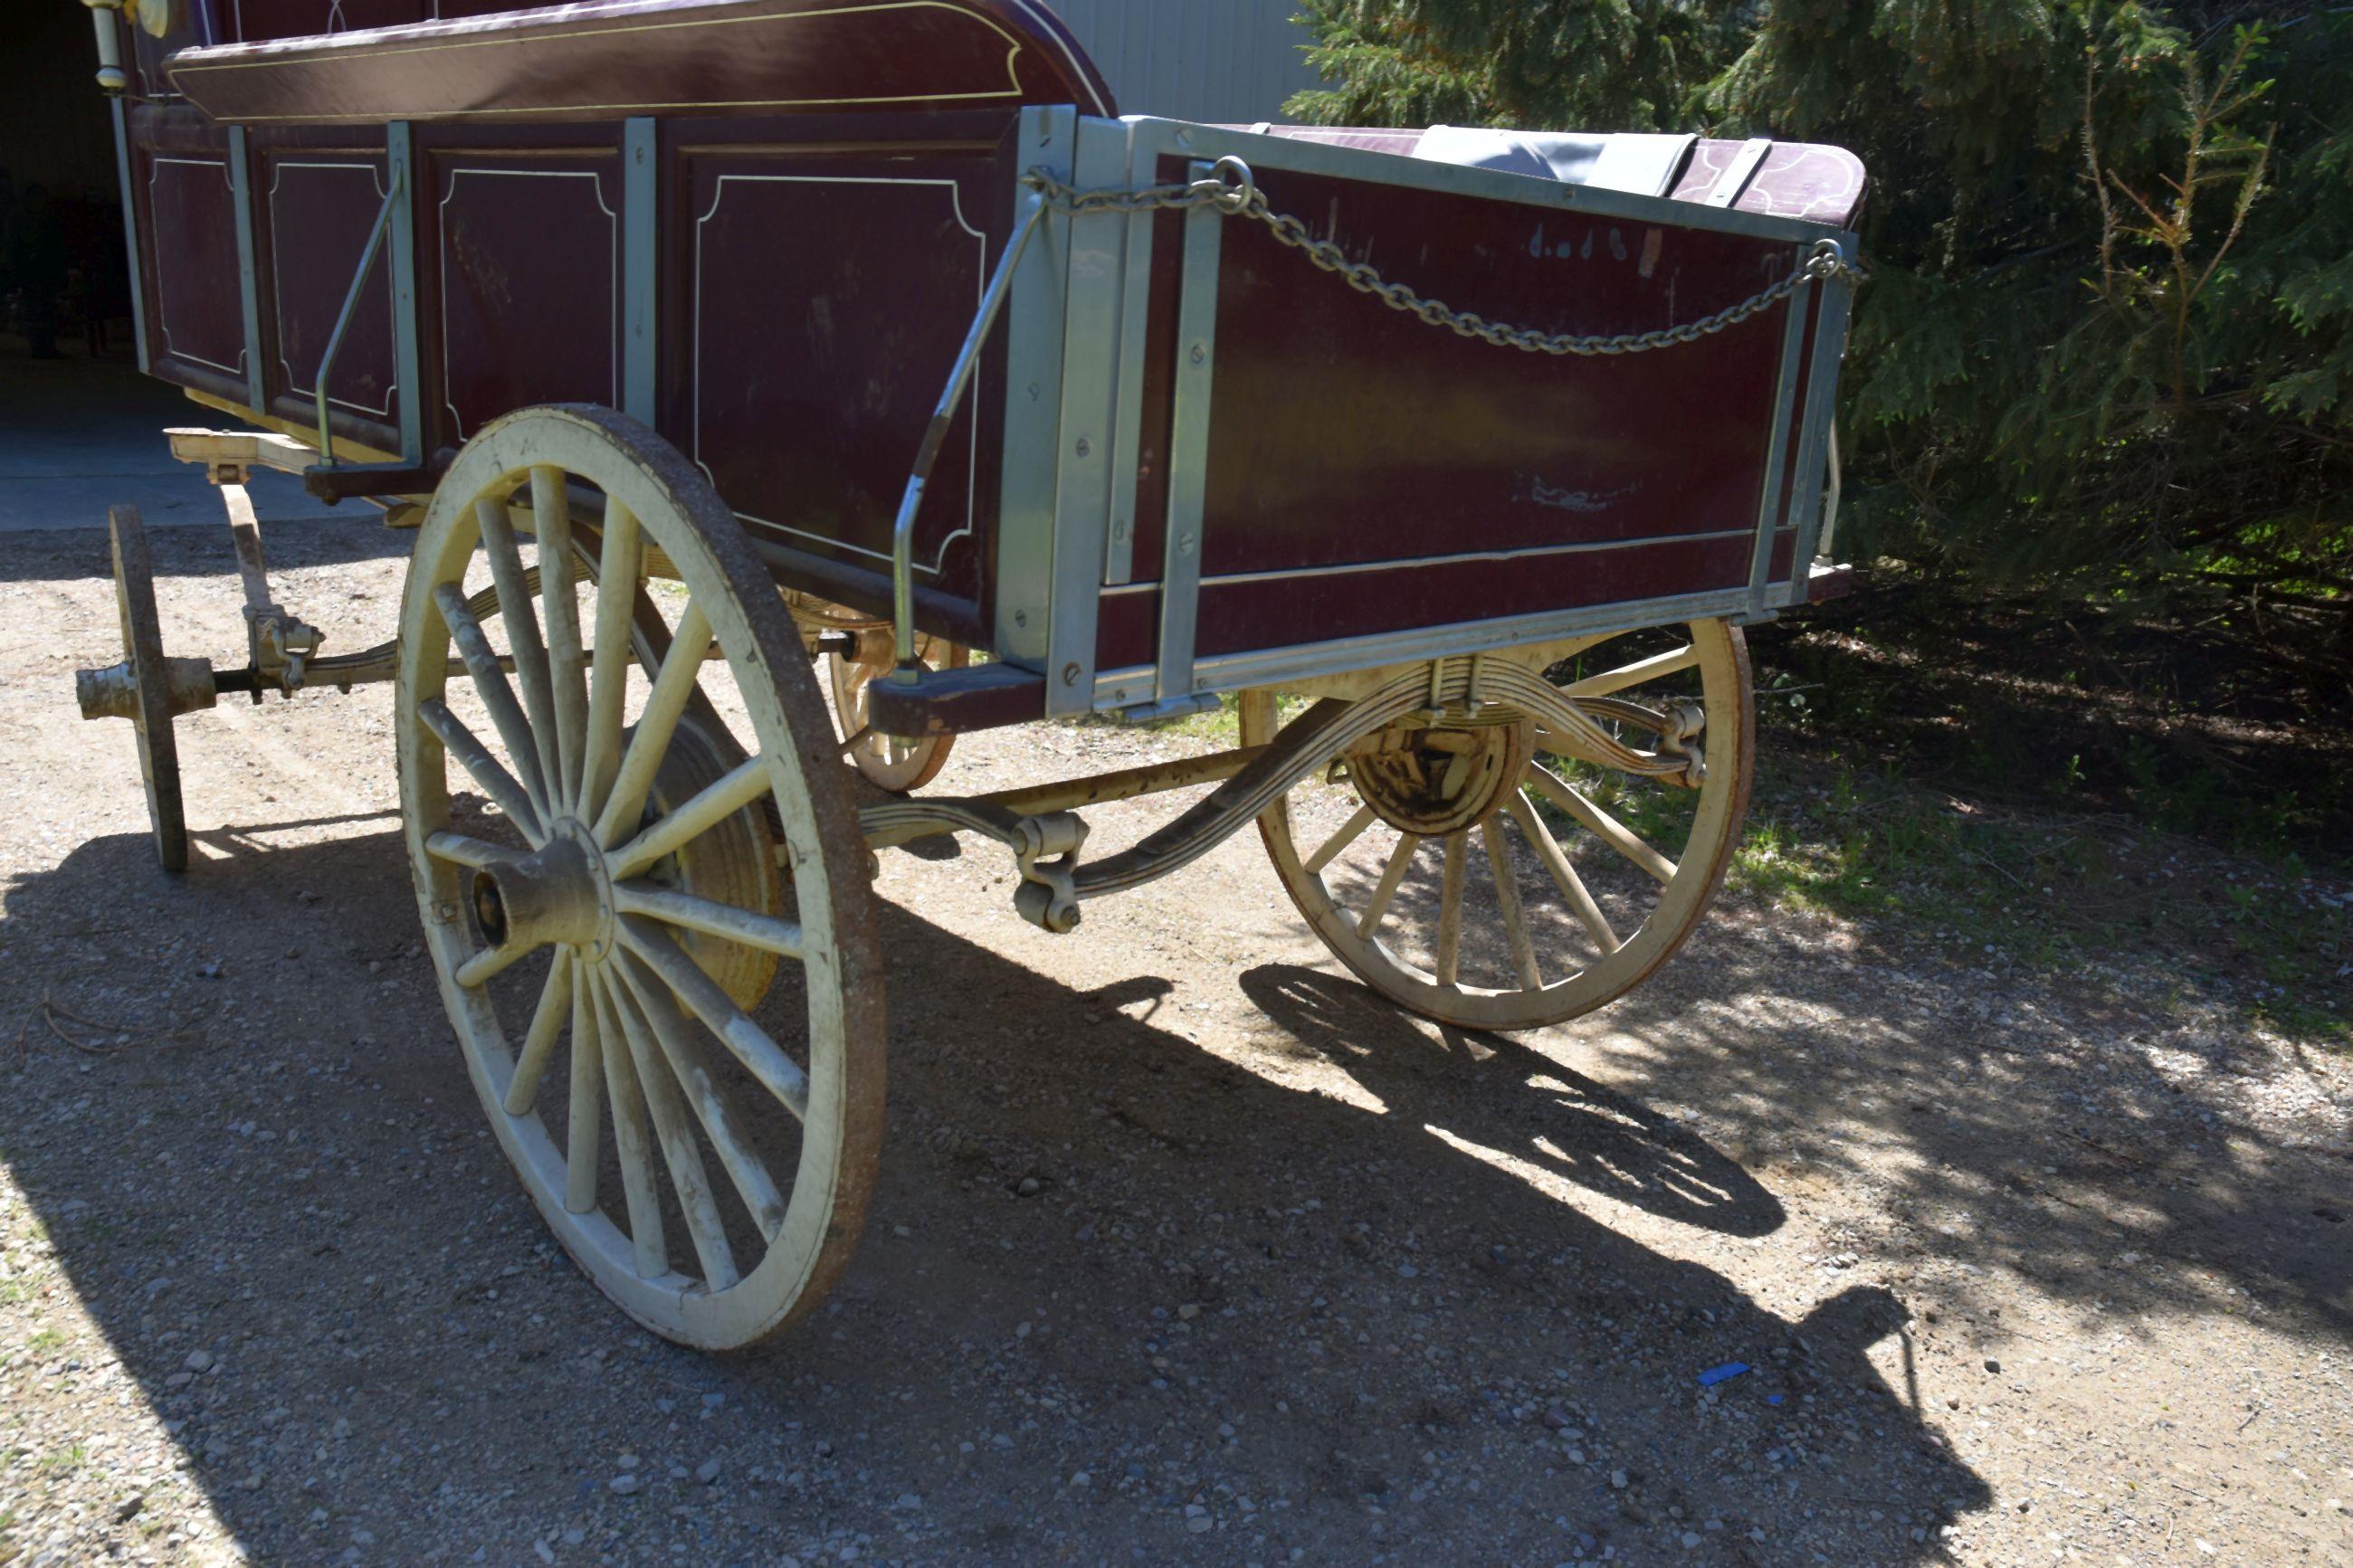 Custom Built Horse Parade Wagon, High Seat, Wooden Wheels, Up To A 6 Horse Pole